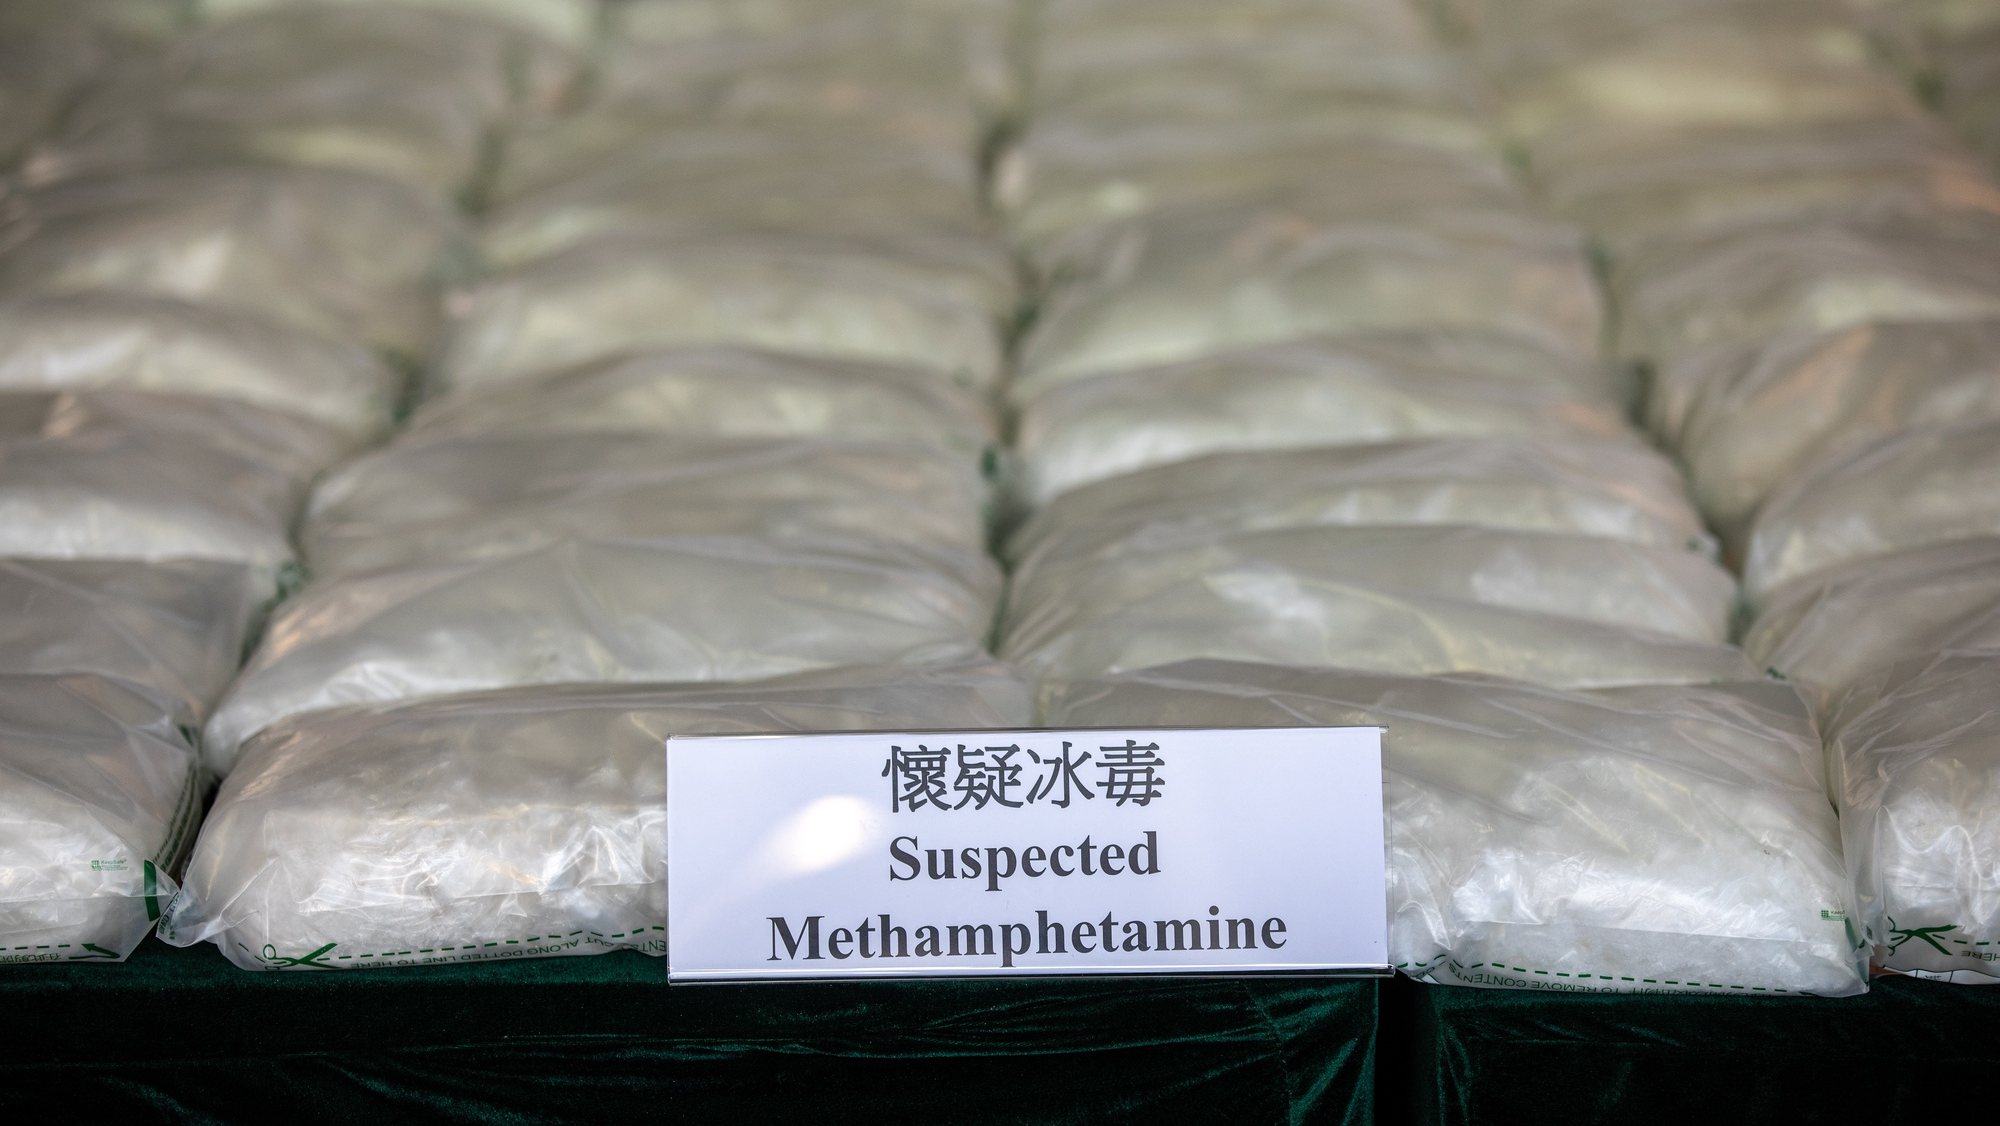 epa08792354 Seized methamphetamine is displayed at a Hong Kong Customs and Excise facility in Hong Kong, China, 02 November 2020. Hong Kong Customs detected the largest-ever methamphetamine trafficking case on 20 October 2020 and seized over 500 kilograms of suspected methamphetamine with an estimated market value of 298 million US dollar (33 million euro).  EPA/JEROME FAVRE